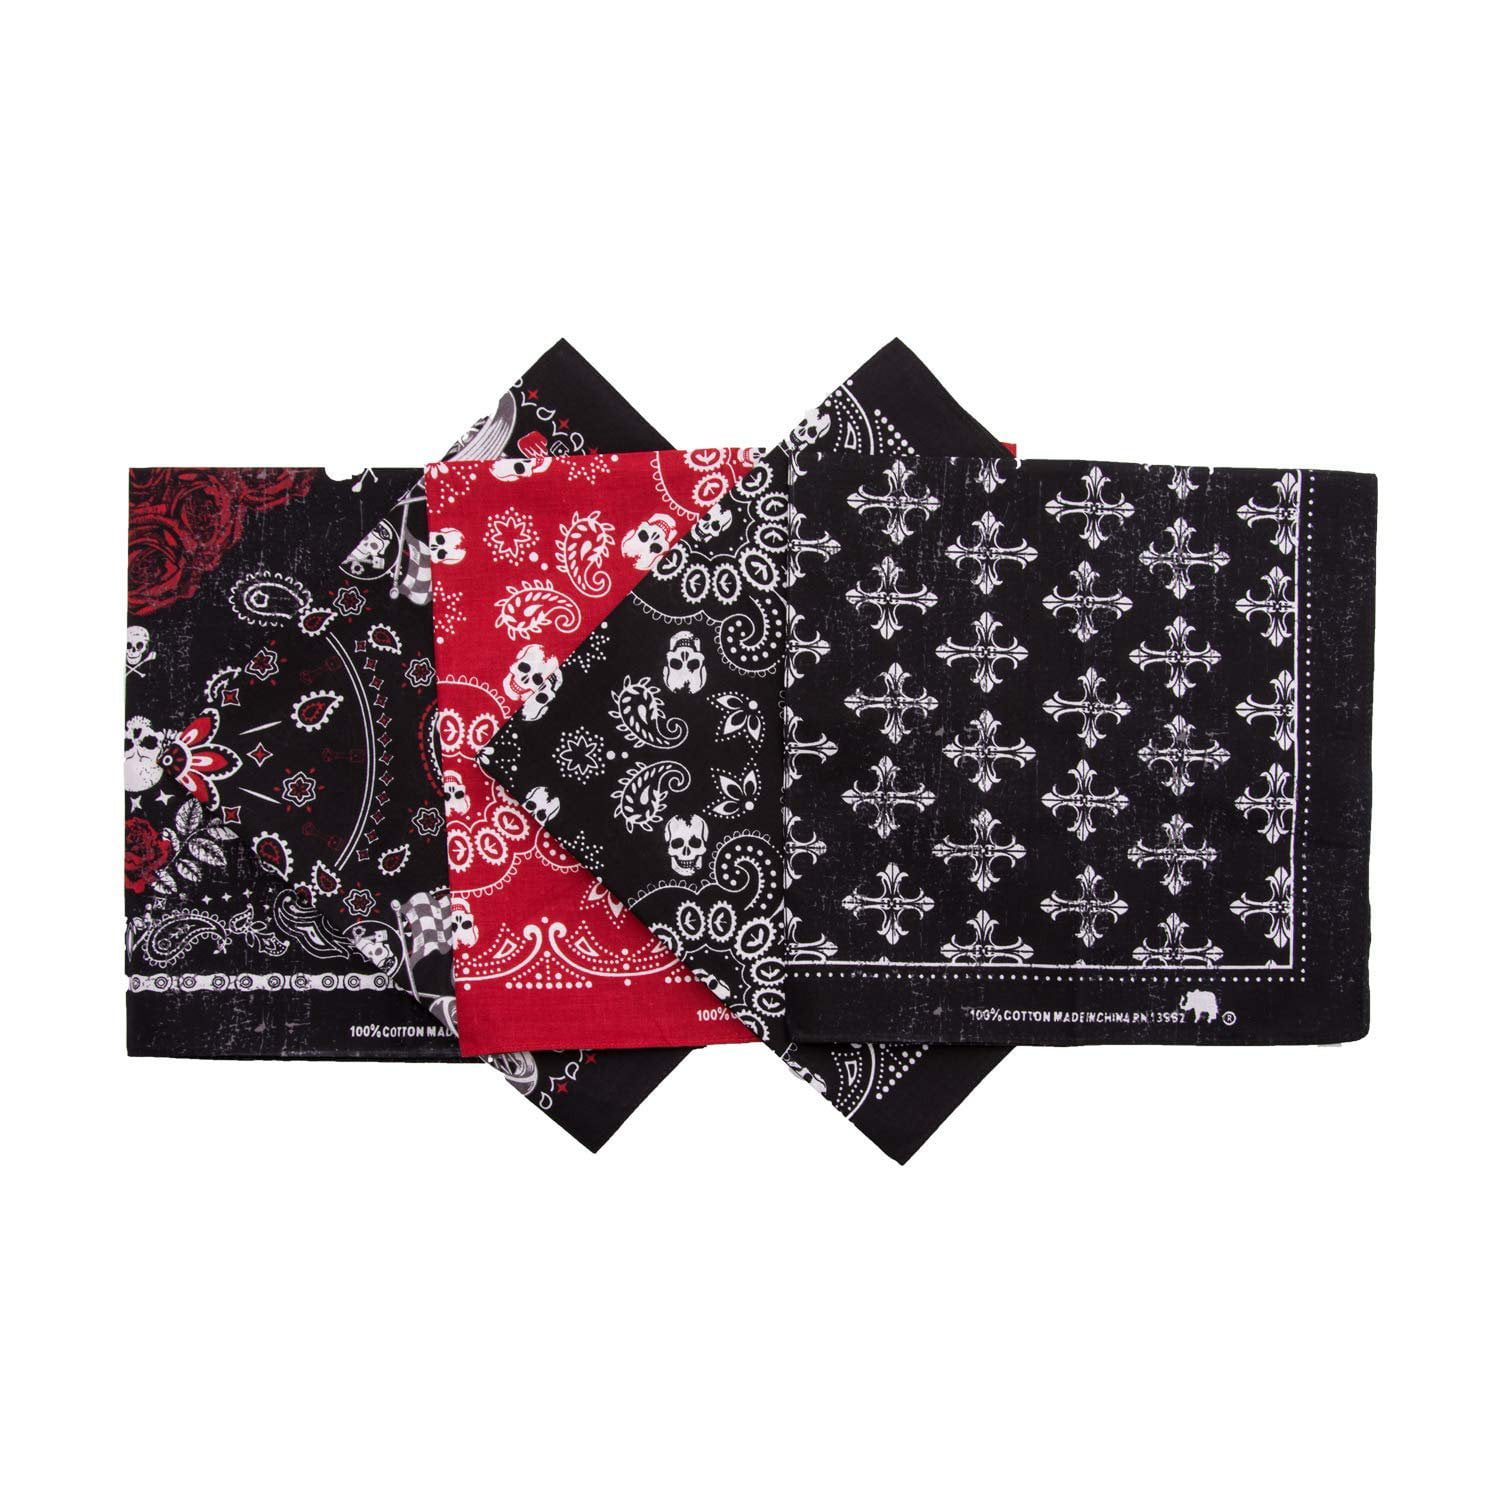 Details about   100% COTTON Large Non Fading Paisley Bandanas 22 x 22 IN. 